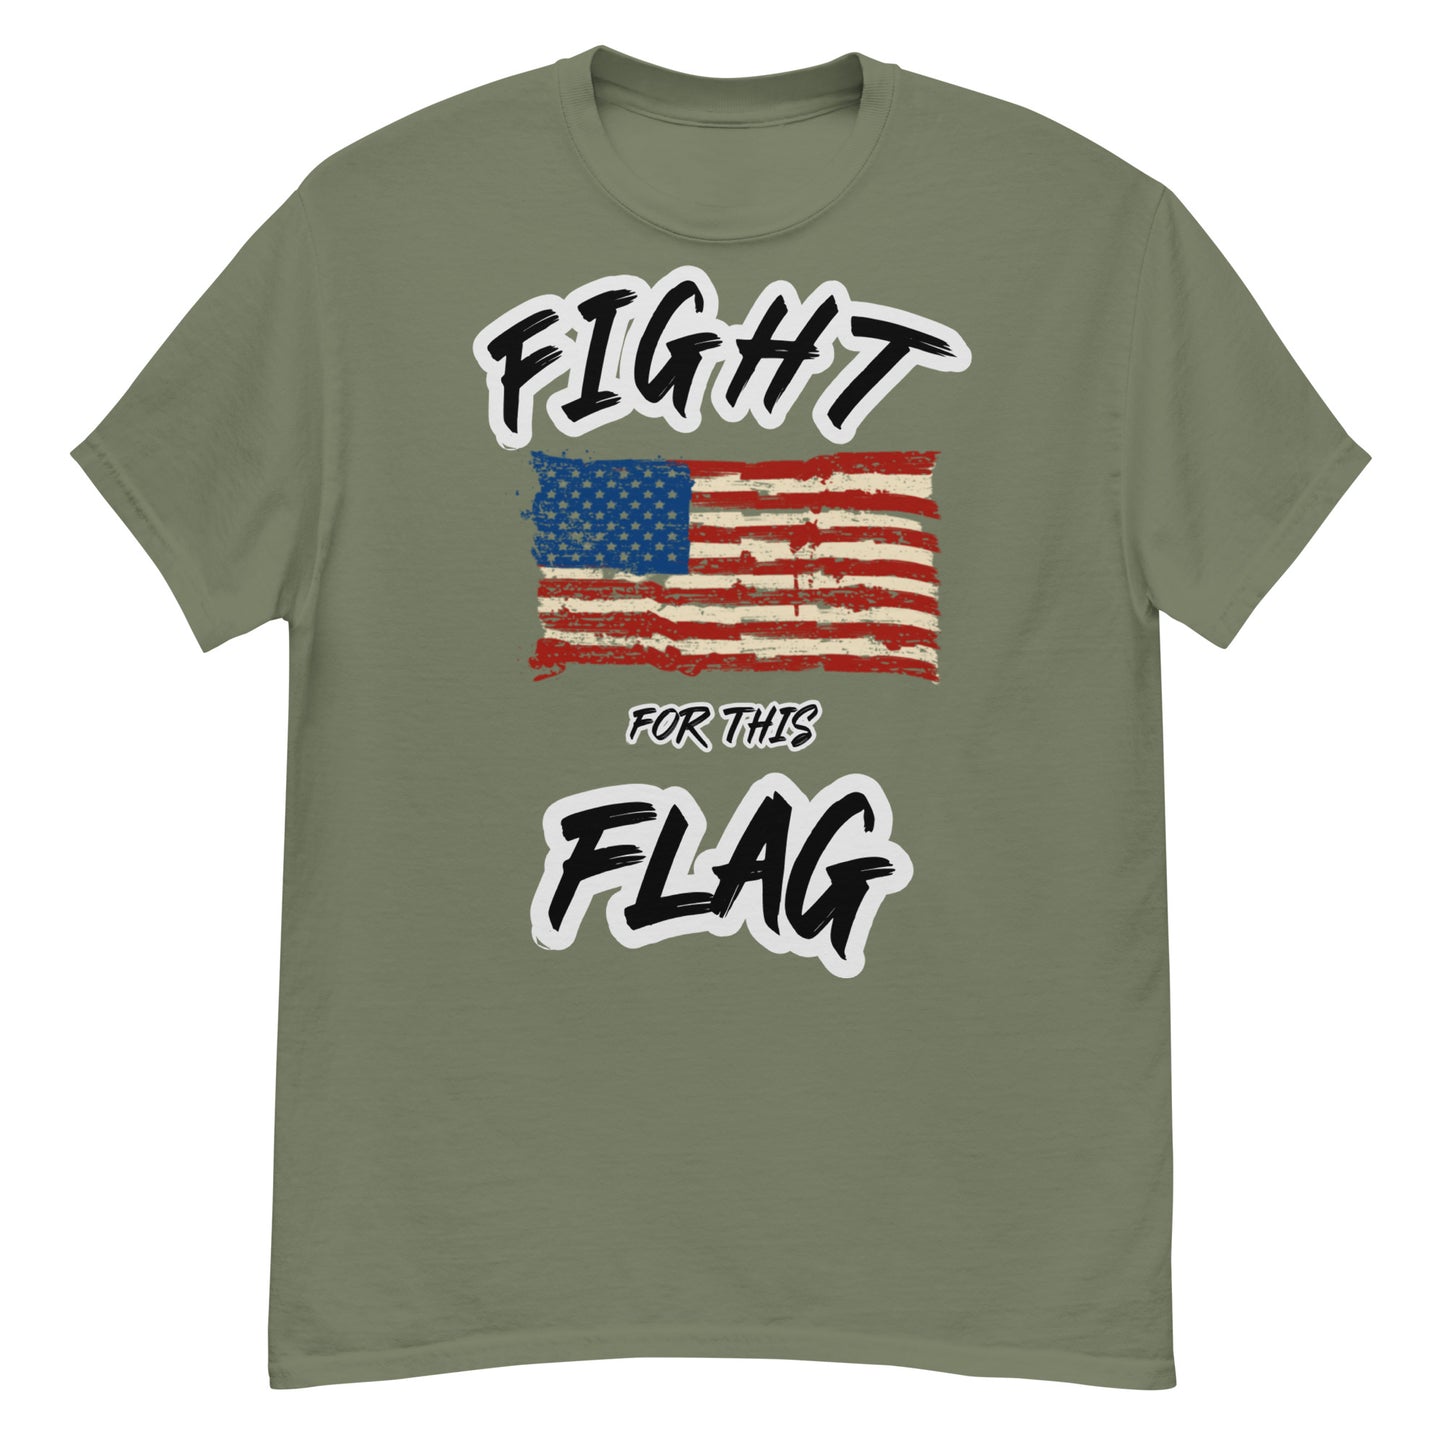 Fight for this Flag - classic tee (gray outline)